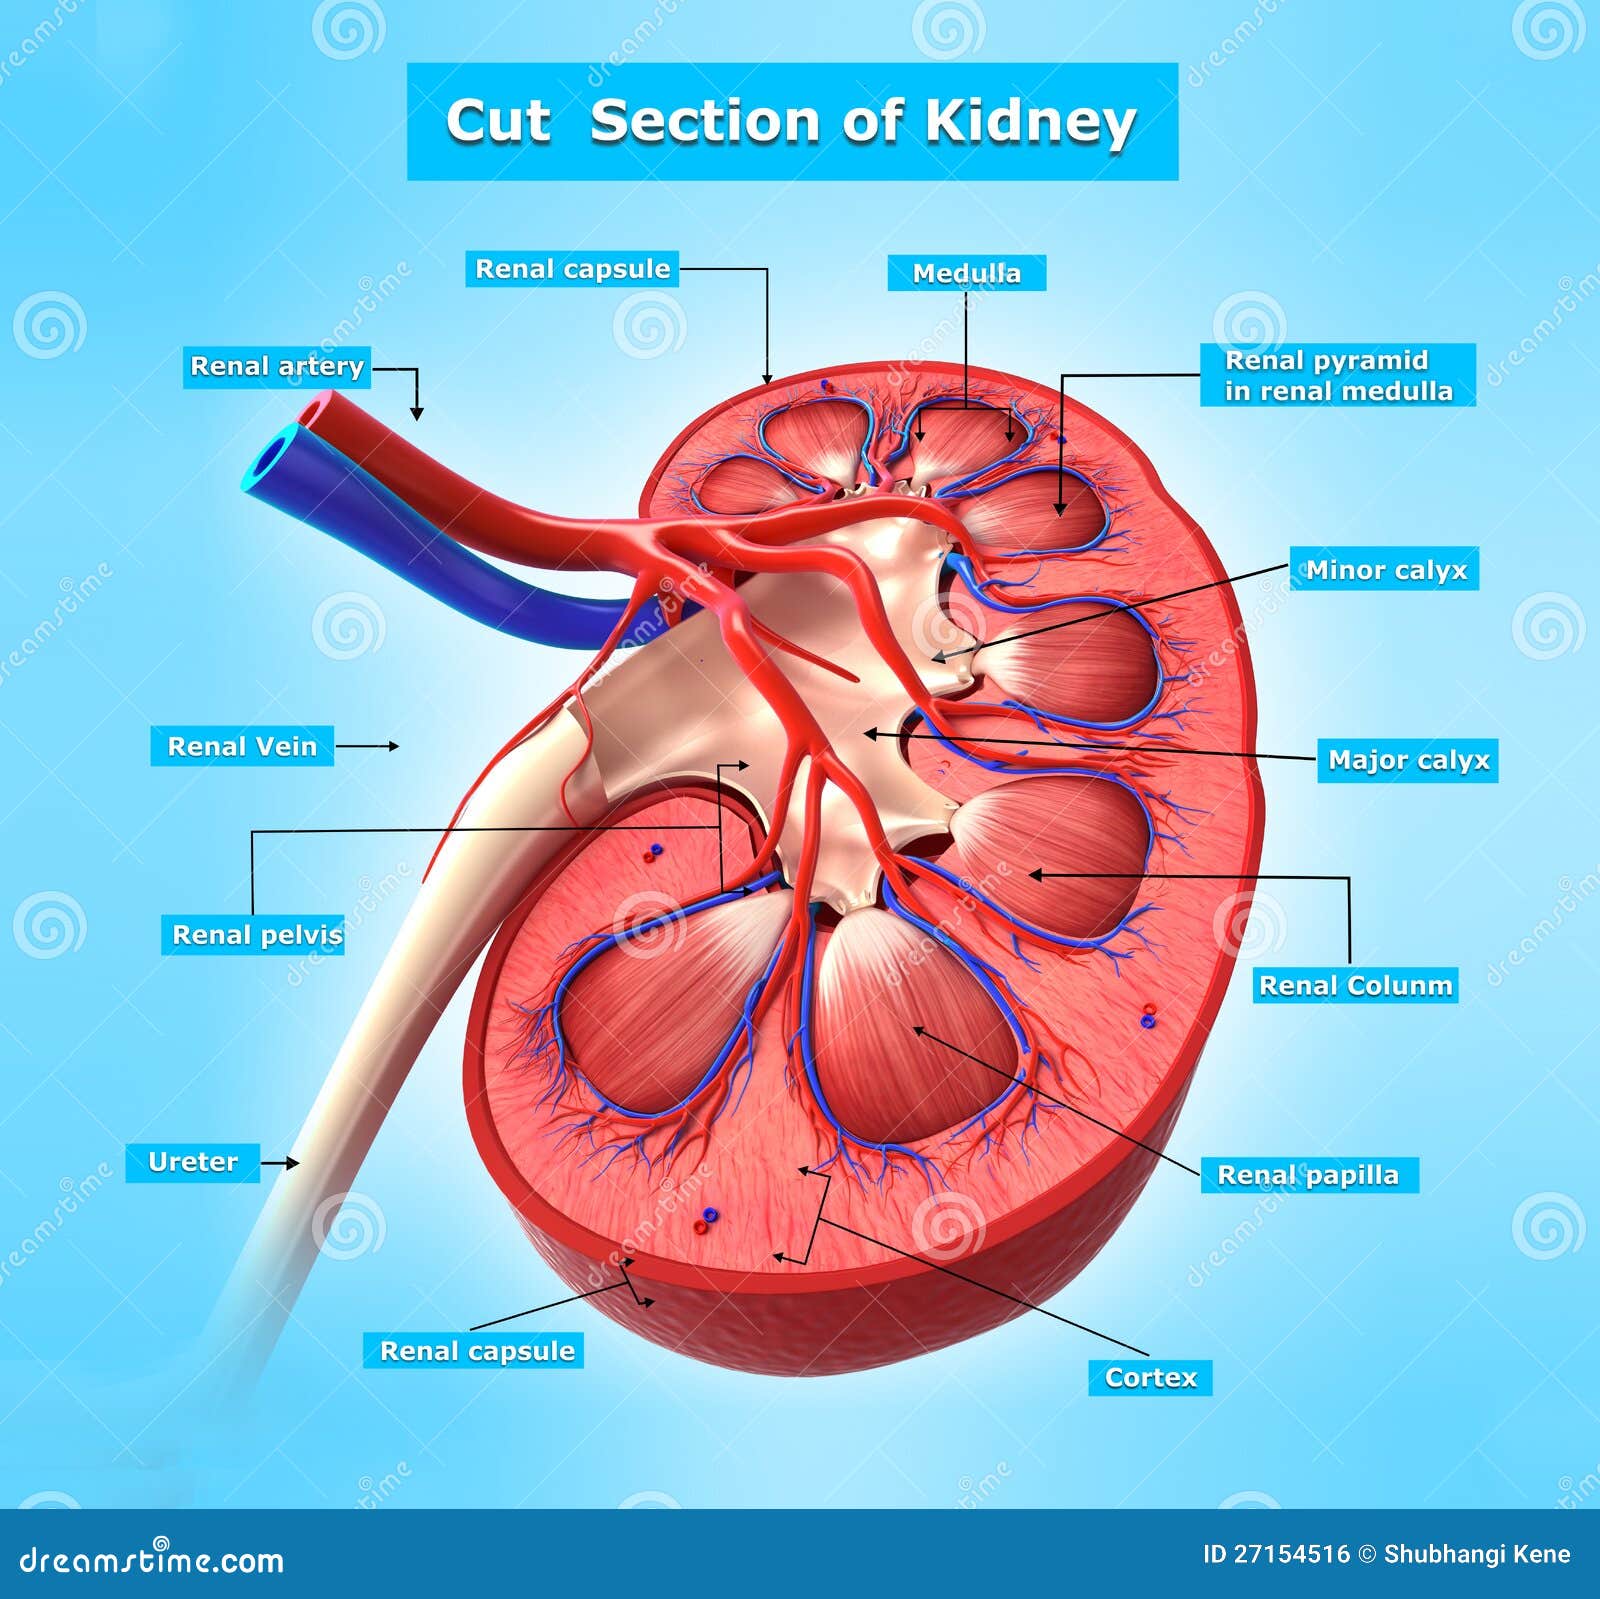 Anatomy Of Kidney Cross Section In Blue Royalty Free Stock Image